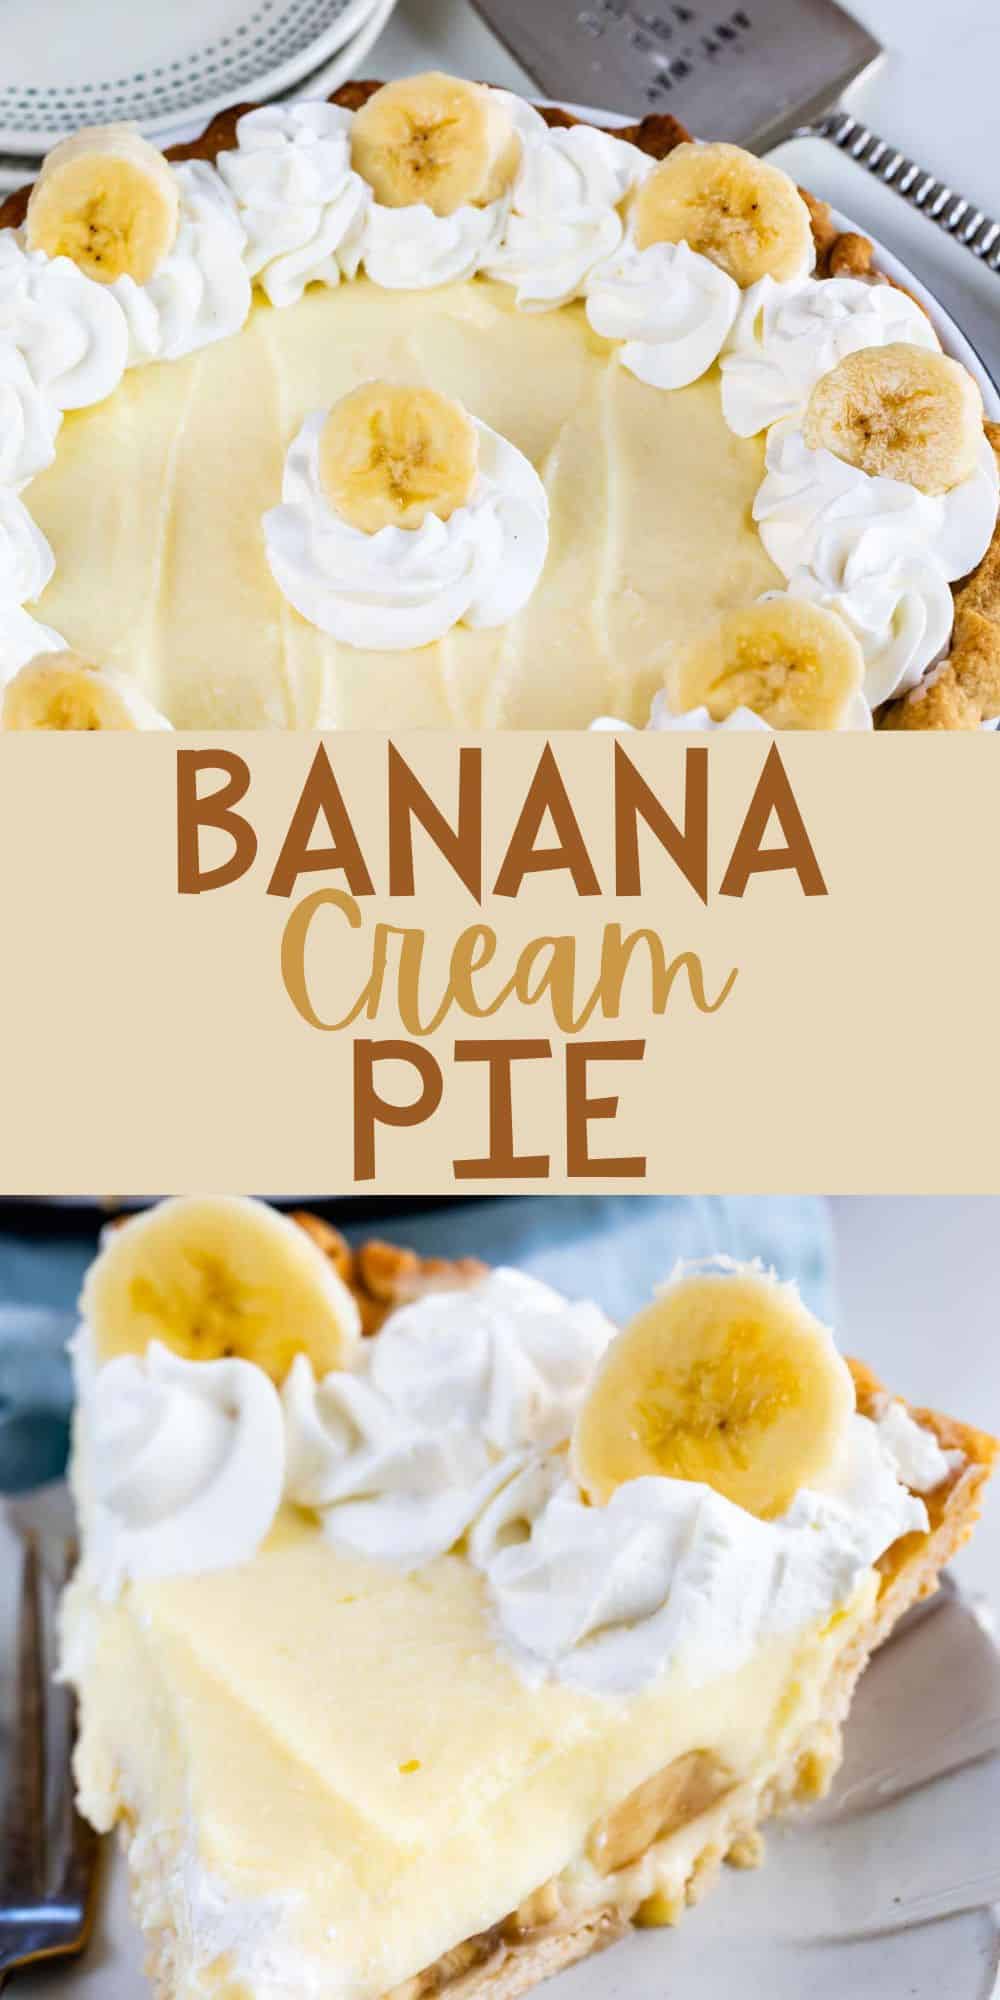 two photos of banana cream pie with sliced bananas on top with words on the image.